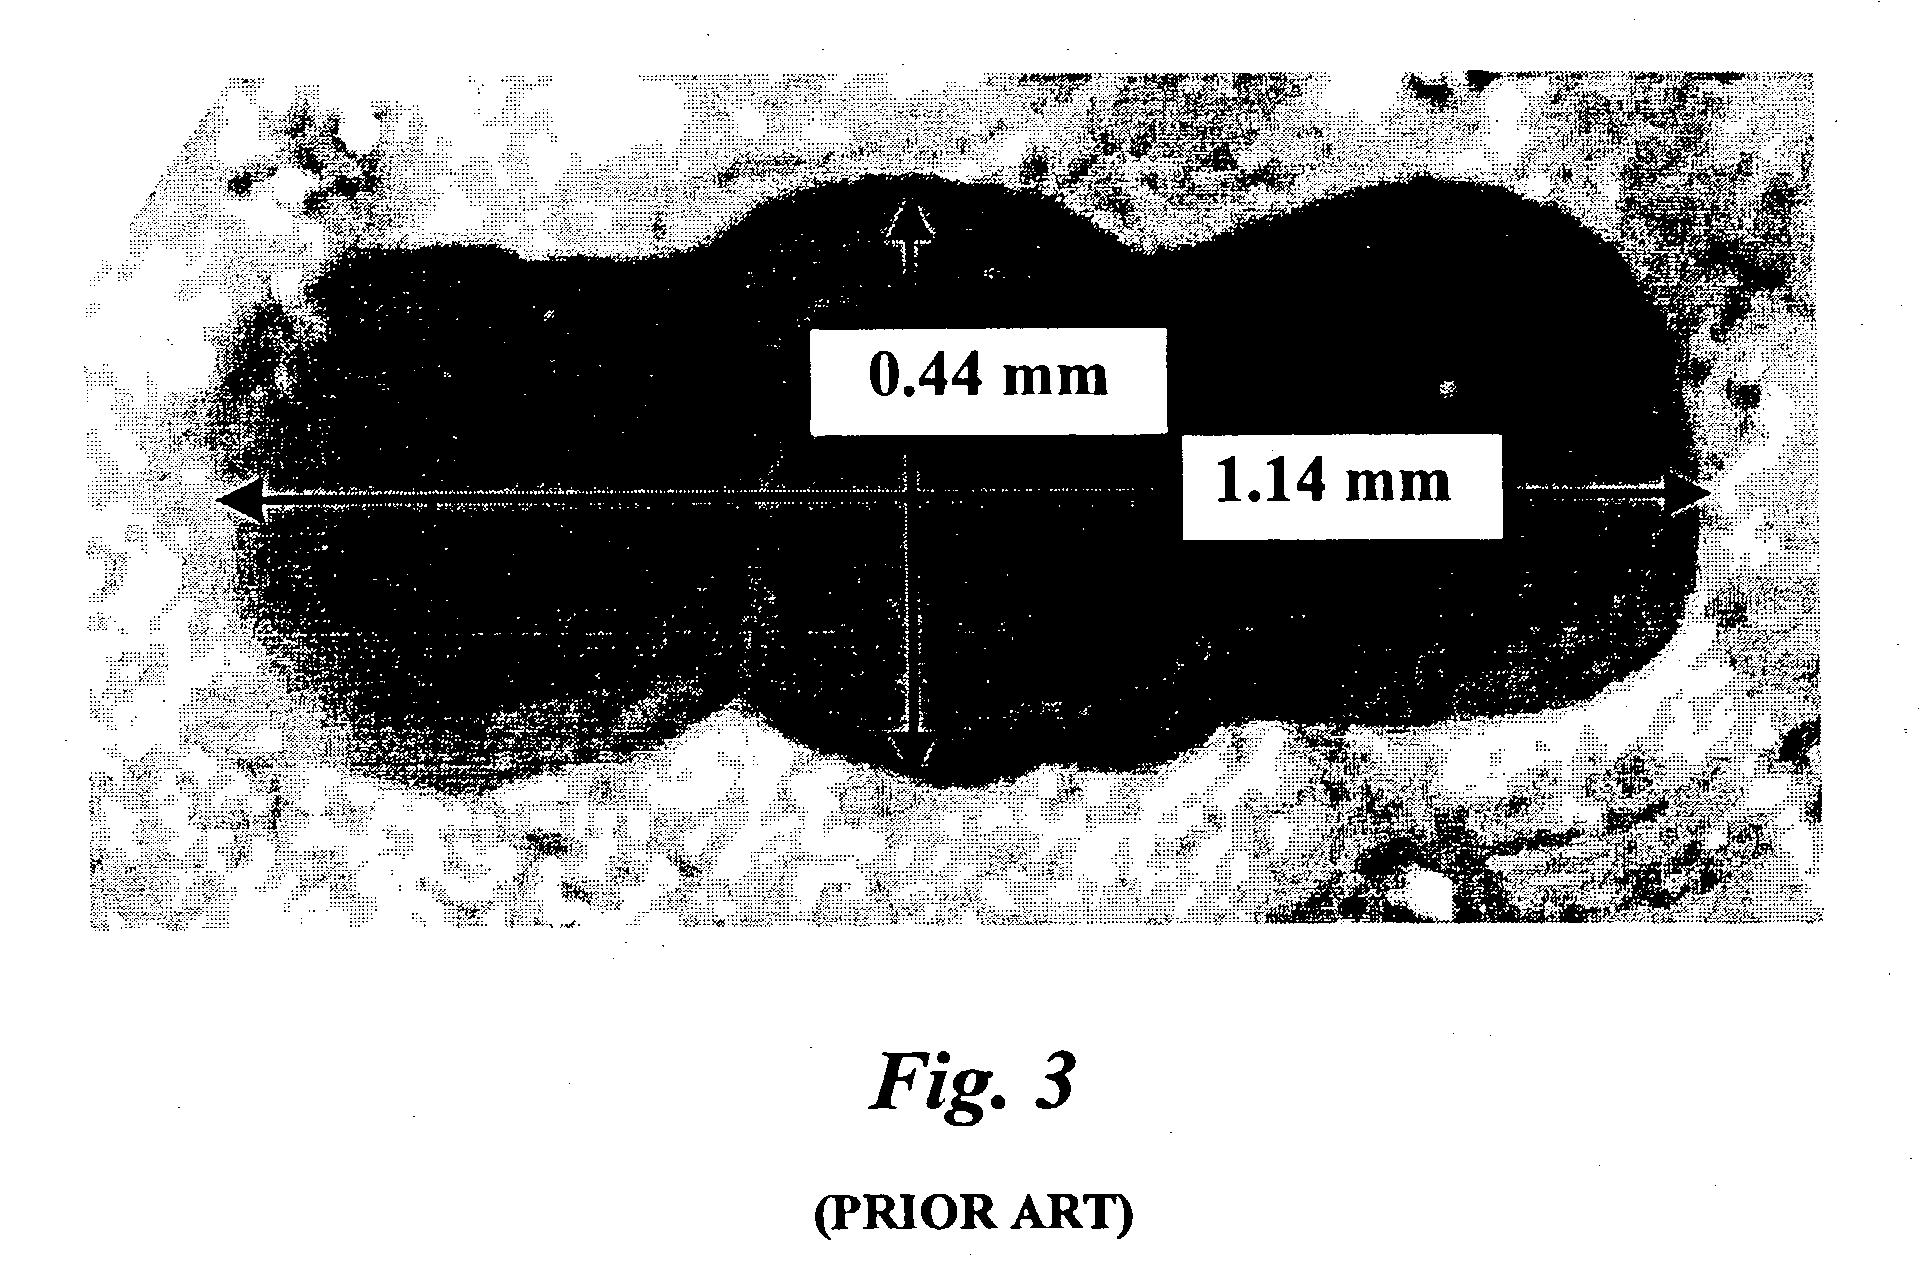 Process for making highly dispersible polymeric reinforcing fibers